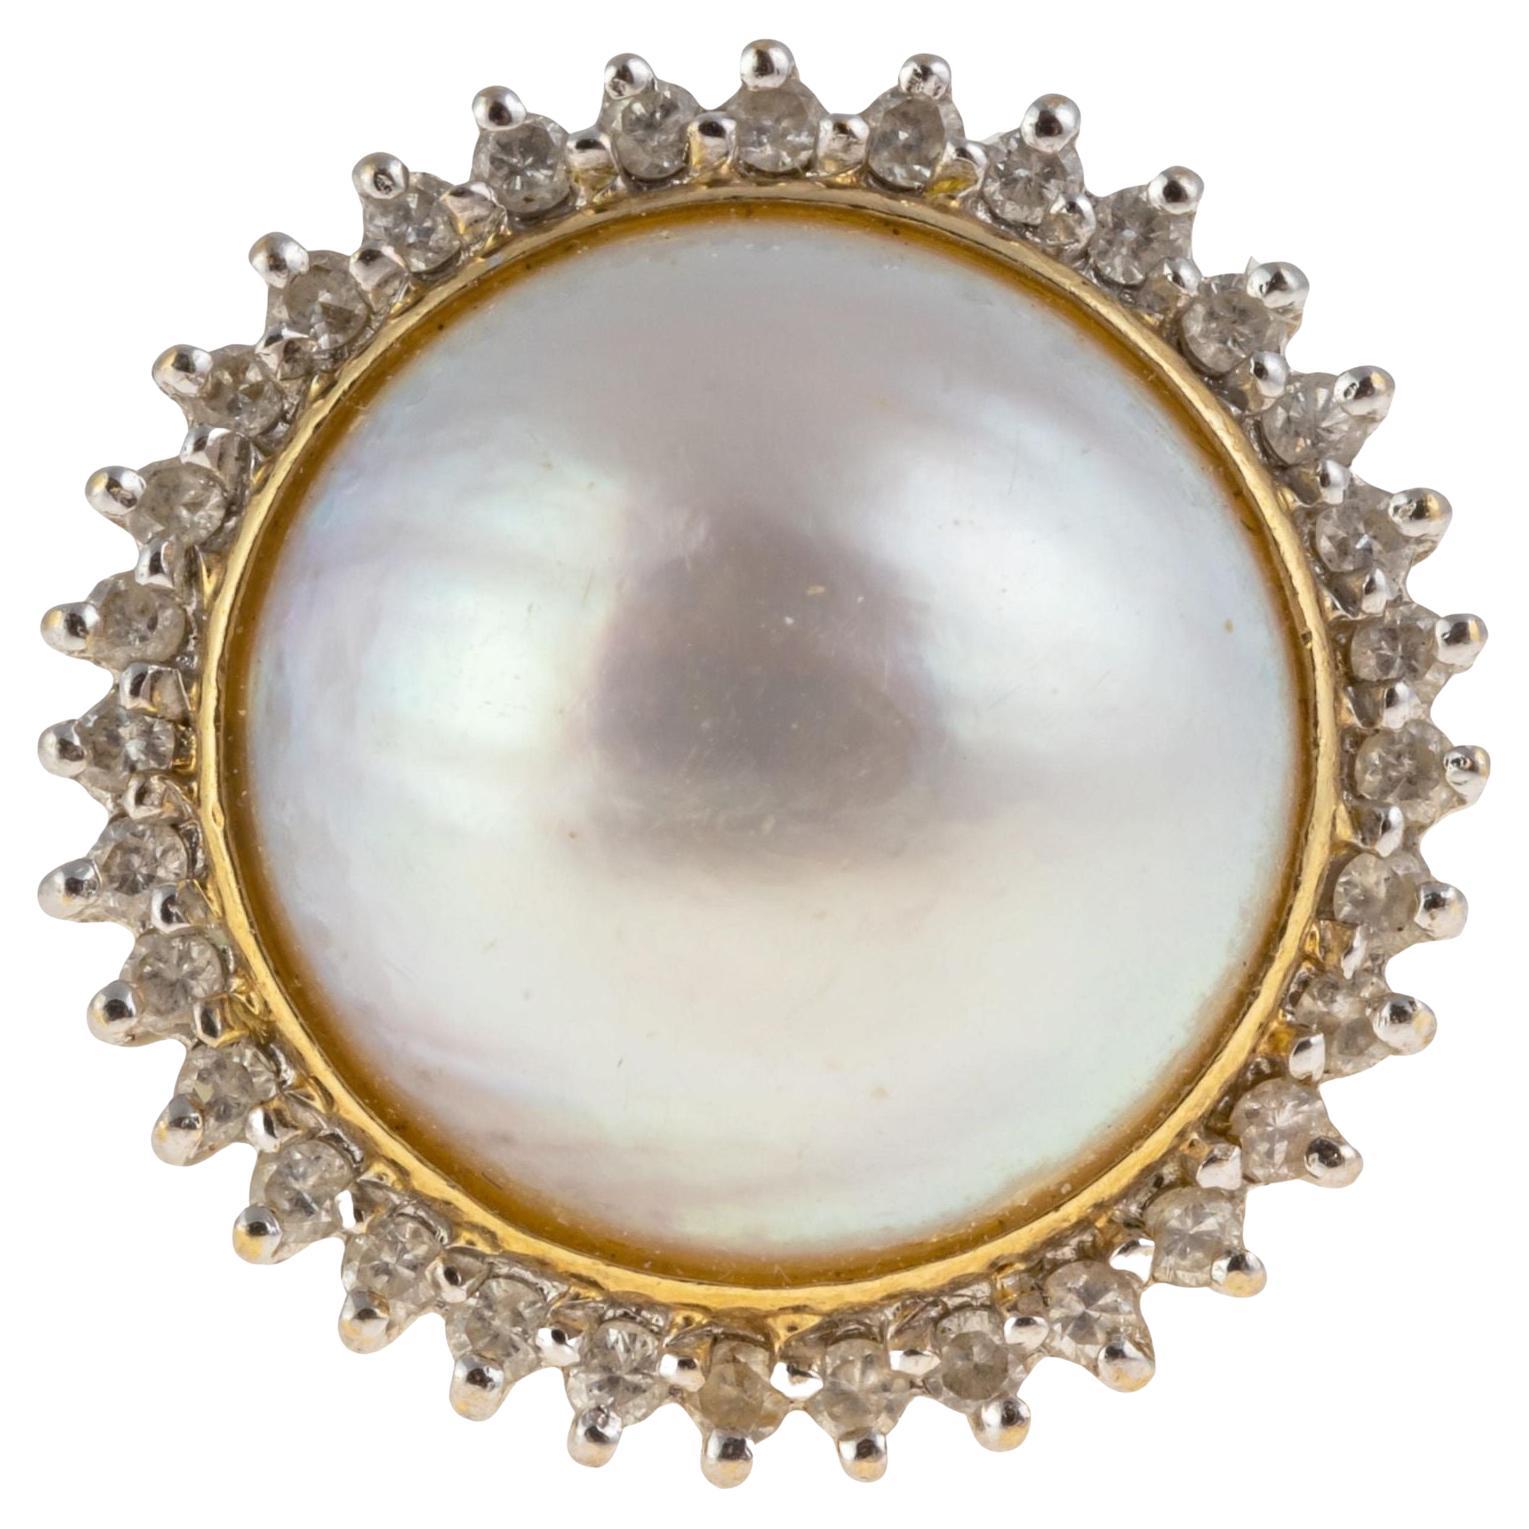 Elegant 14K Yellow Gold Mabe Pearl Diamond Ring
Vintage Italian classic large mabe pearl ring crafted of 14k gold features a central 14mm mabe pearl surrounded by a halo of small diamonds. Size 7. Weight approximately 7.7 grams. Marked 14kG and 585.